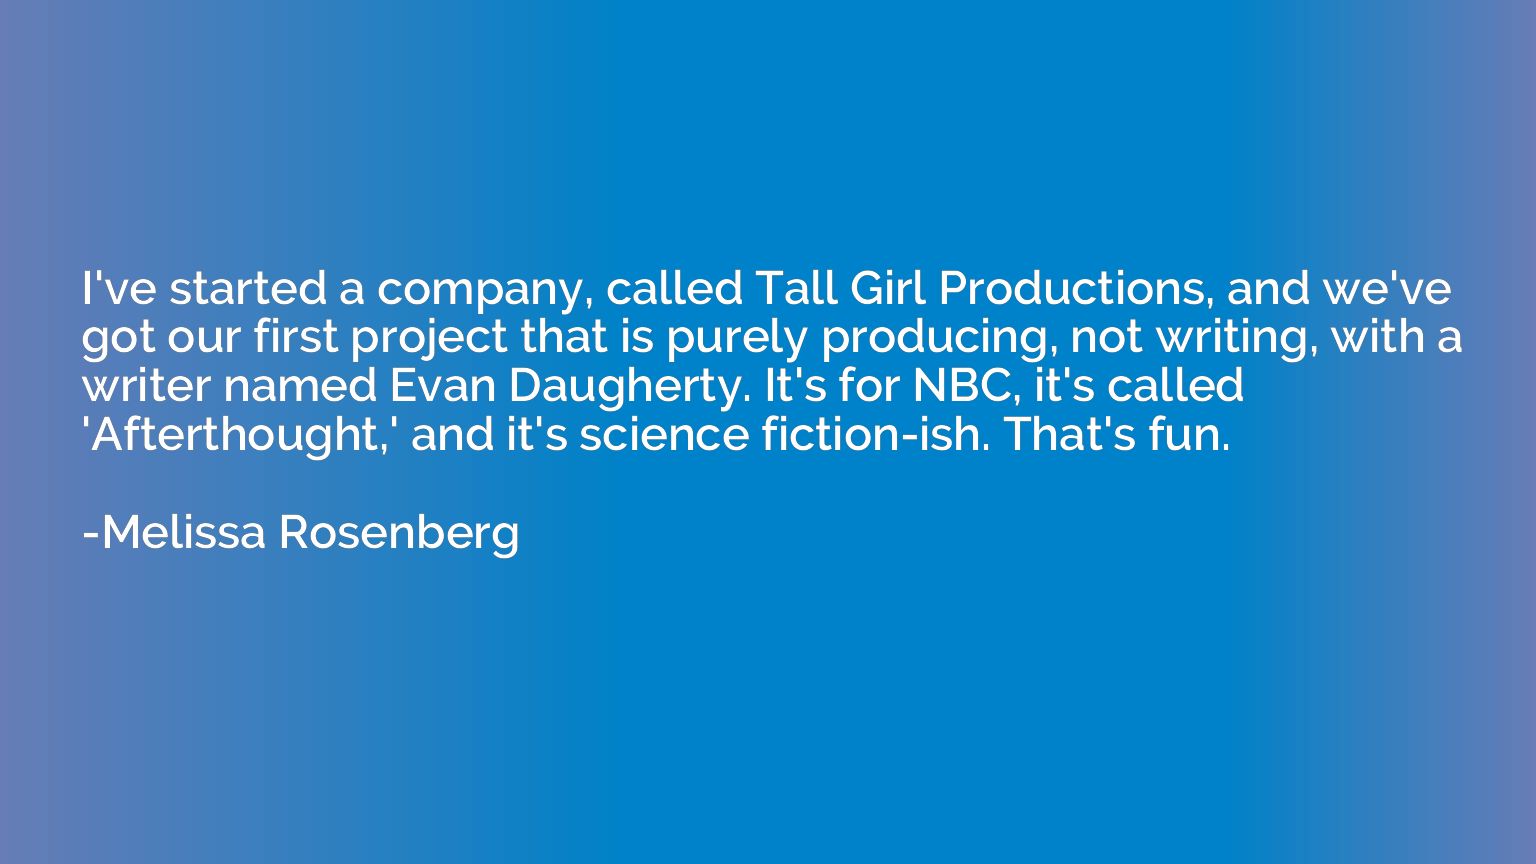 I've started a company, called Tall Girl Productions, and we